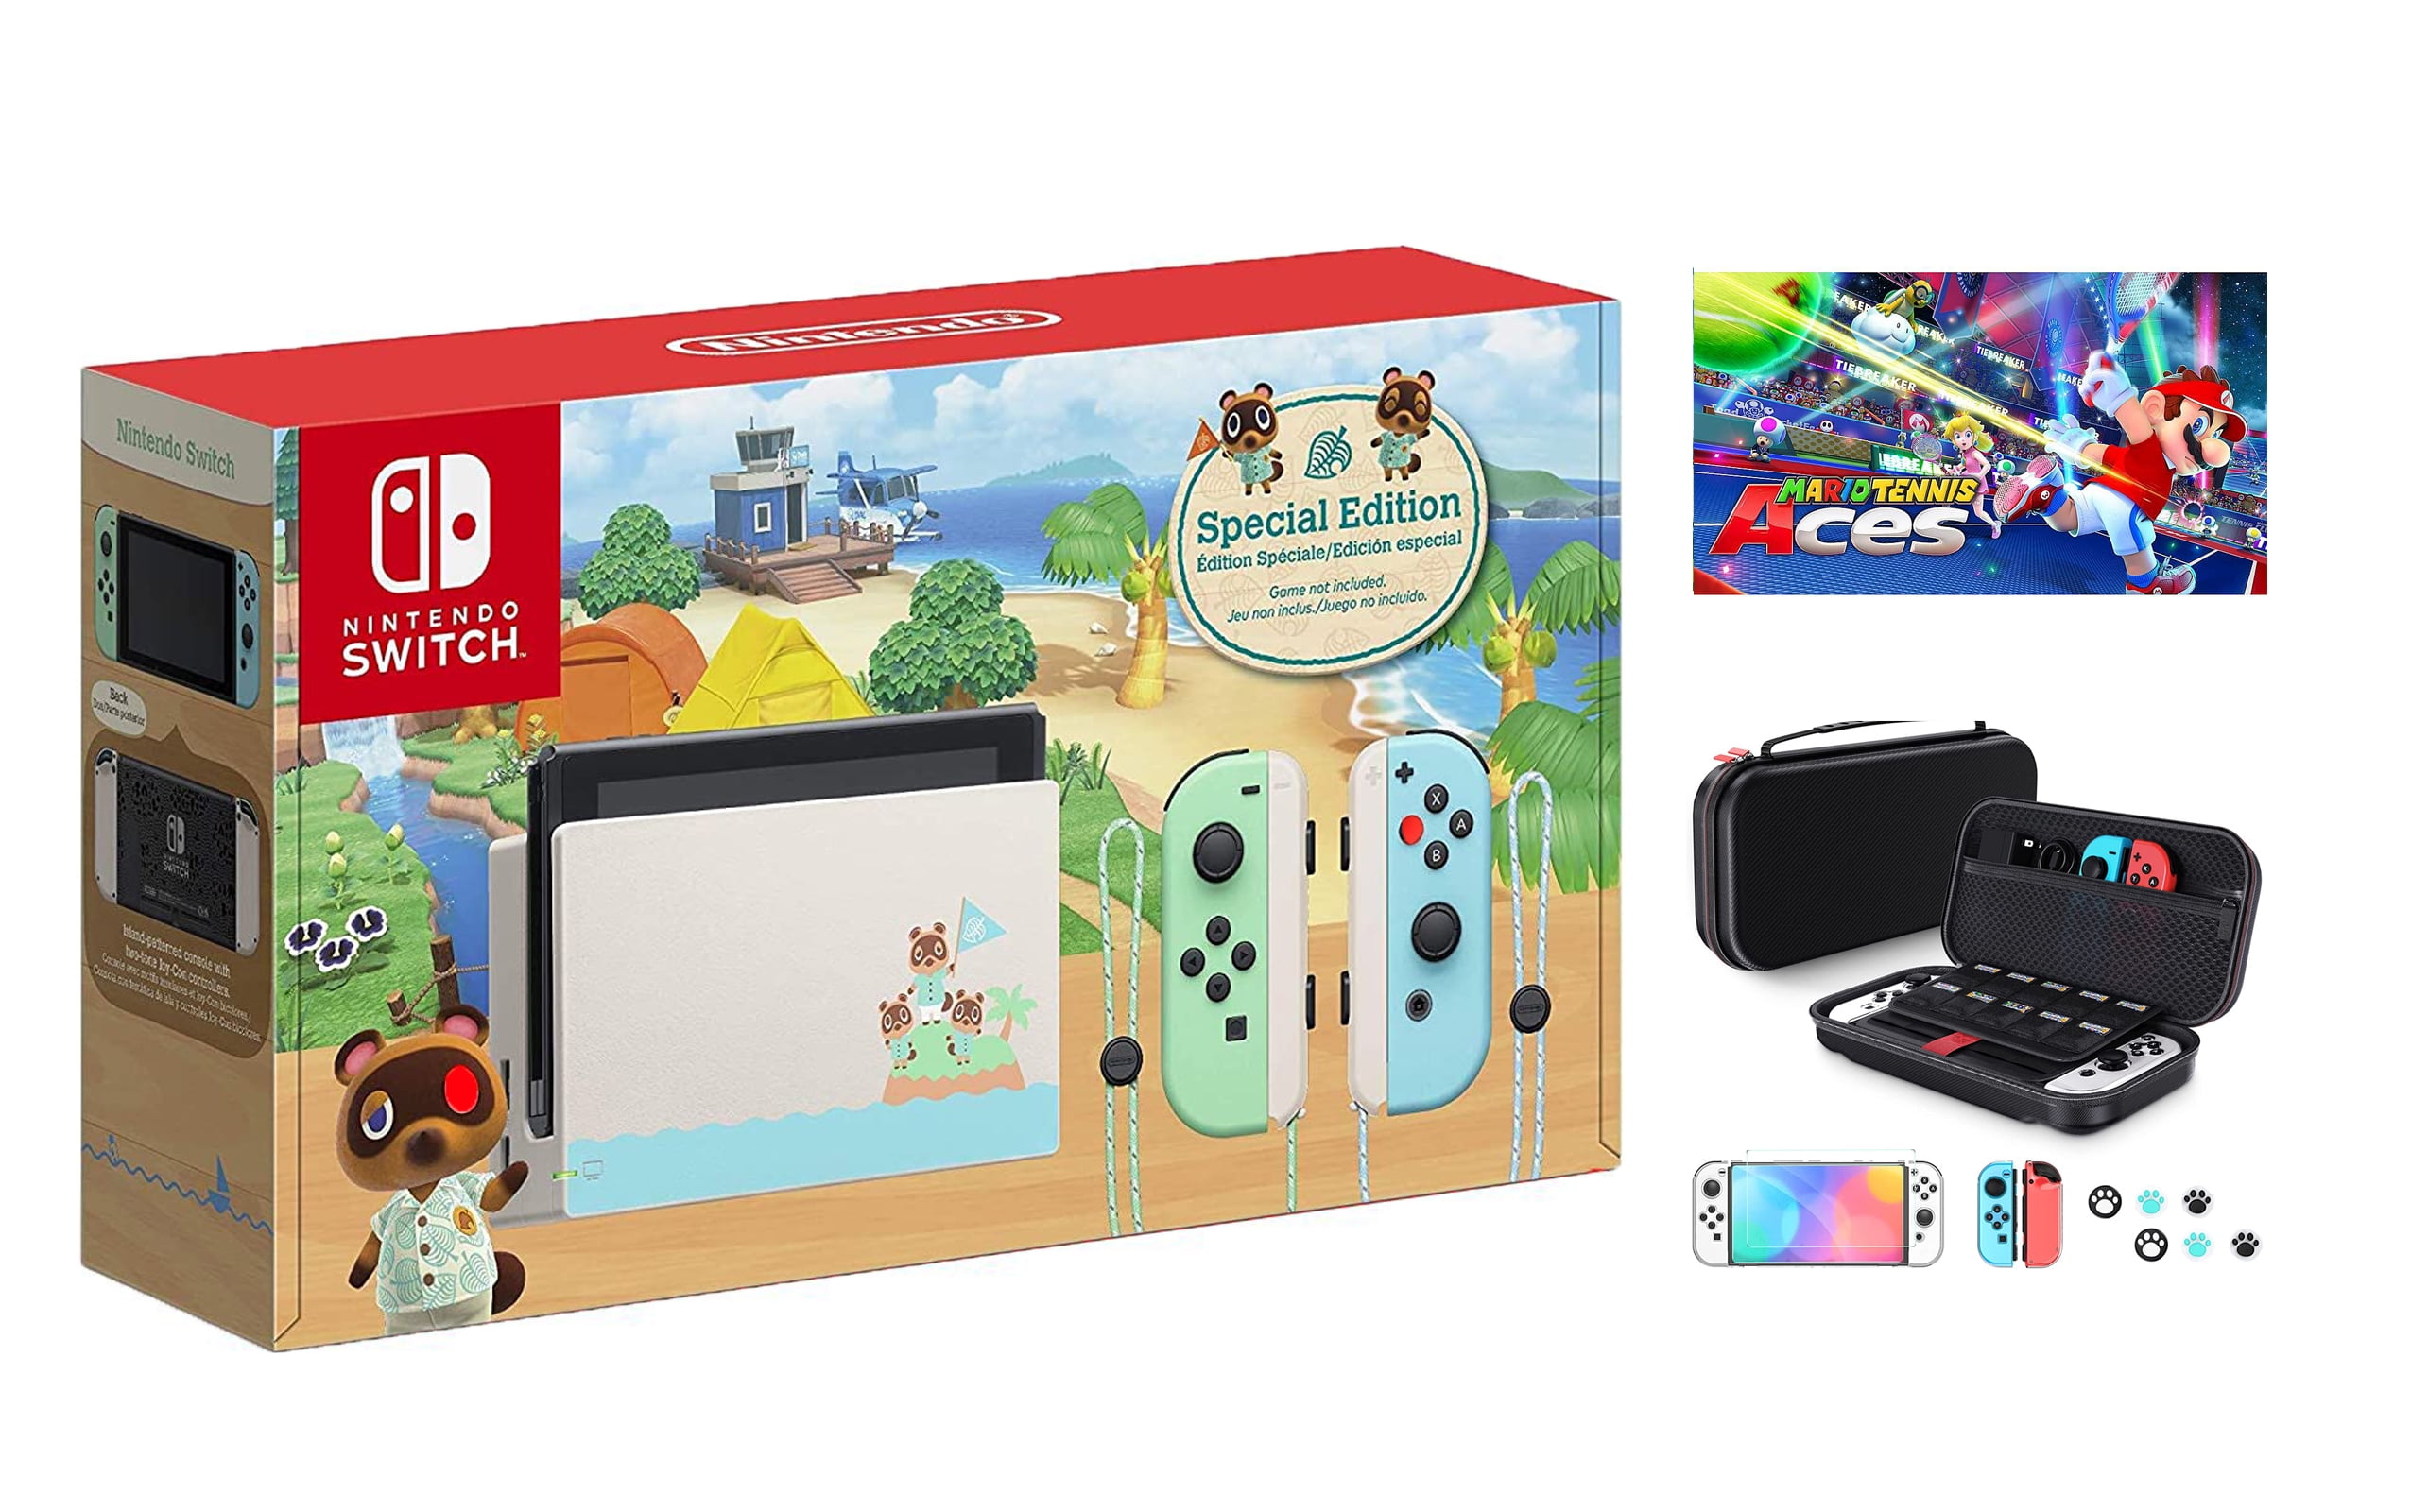 Edition 10 Bundle & Horizons Tennis Storage, Accessory Console, Crossing: 1 Jon-Con Mario Nintendo Switch 32GB Internal Animal Aces with New in Case